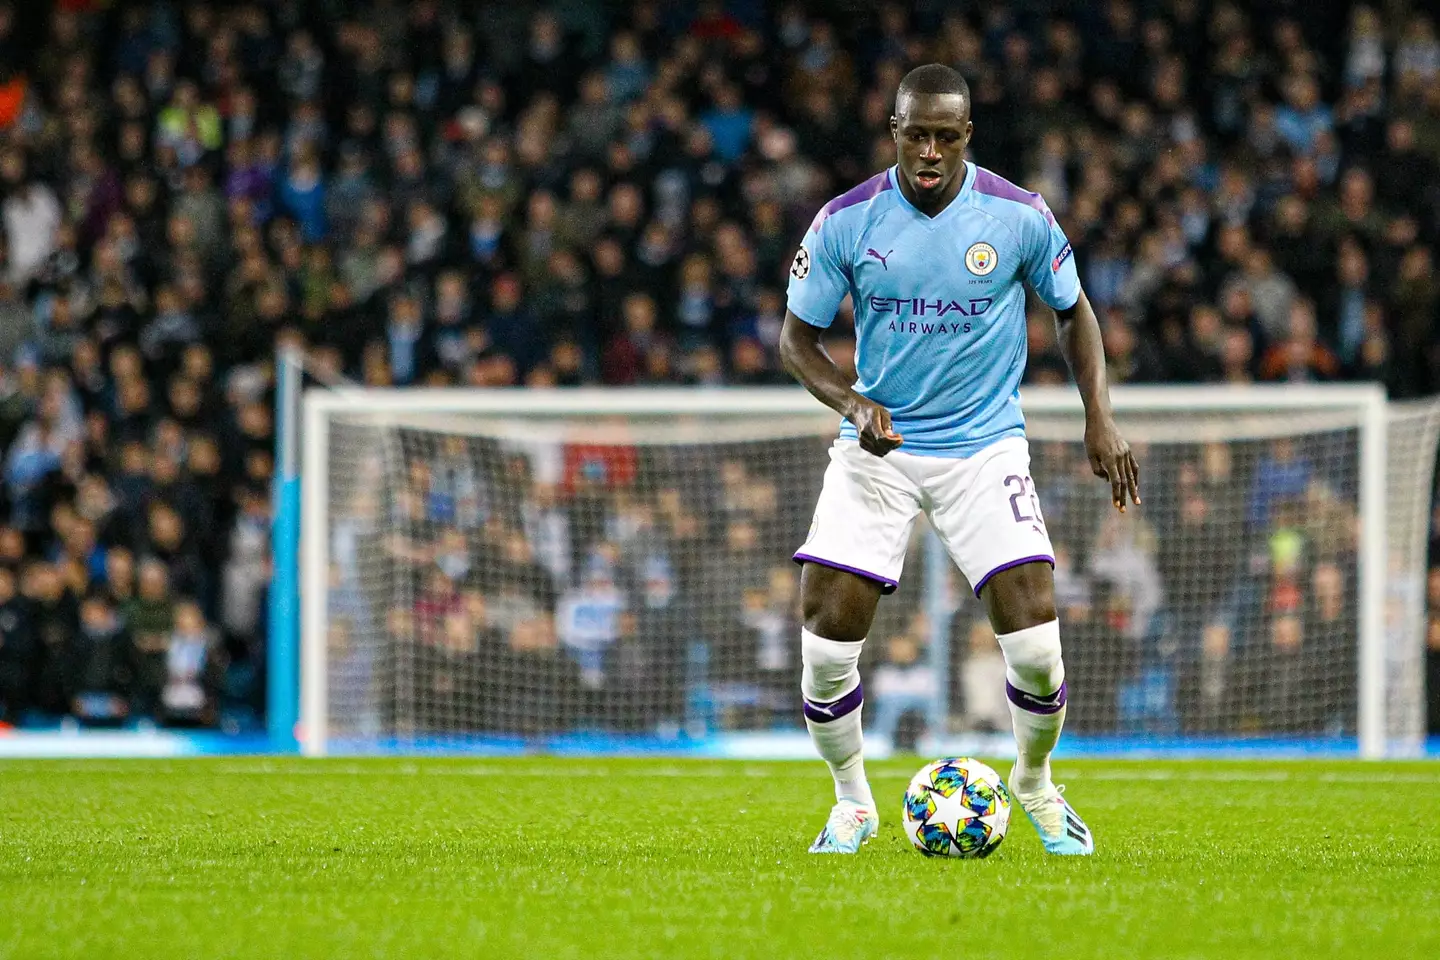 A jury found footballer Benjamin Mendy not guilty on six counts of rape, failing to reach a verdict on two other charges.